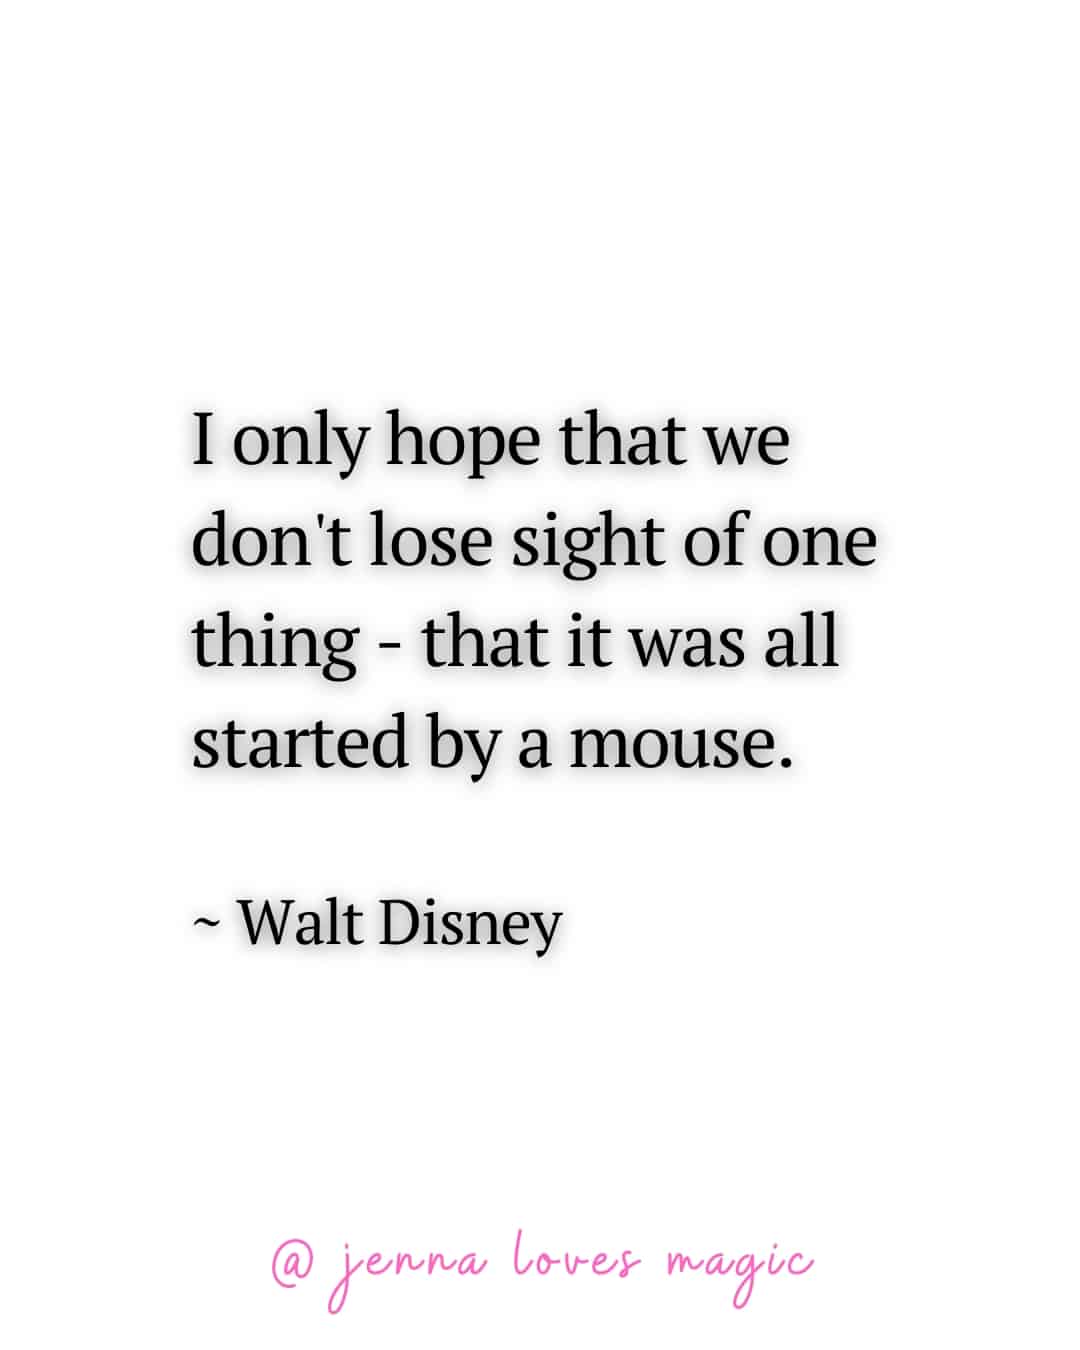 I only hope that we don't lose sight of one thing - that it was all started by a mouse Walt Disney quote